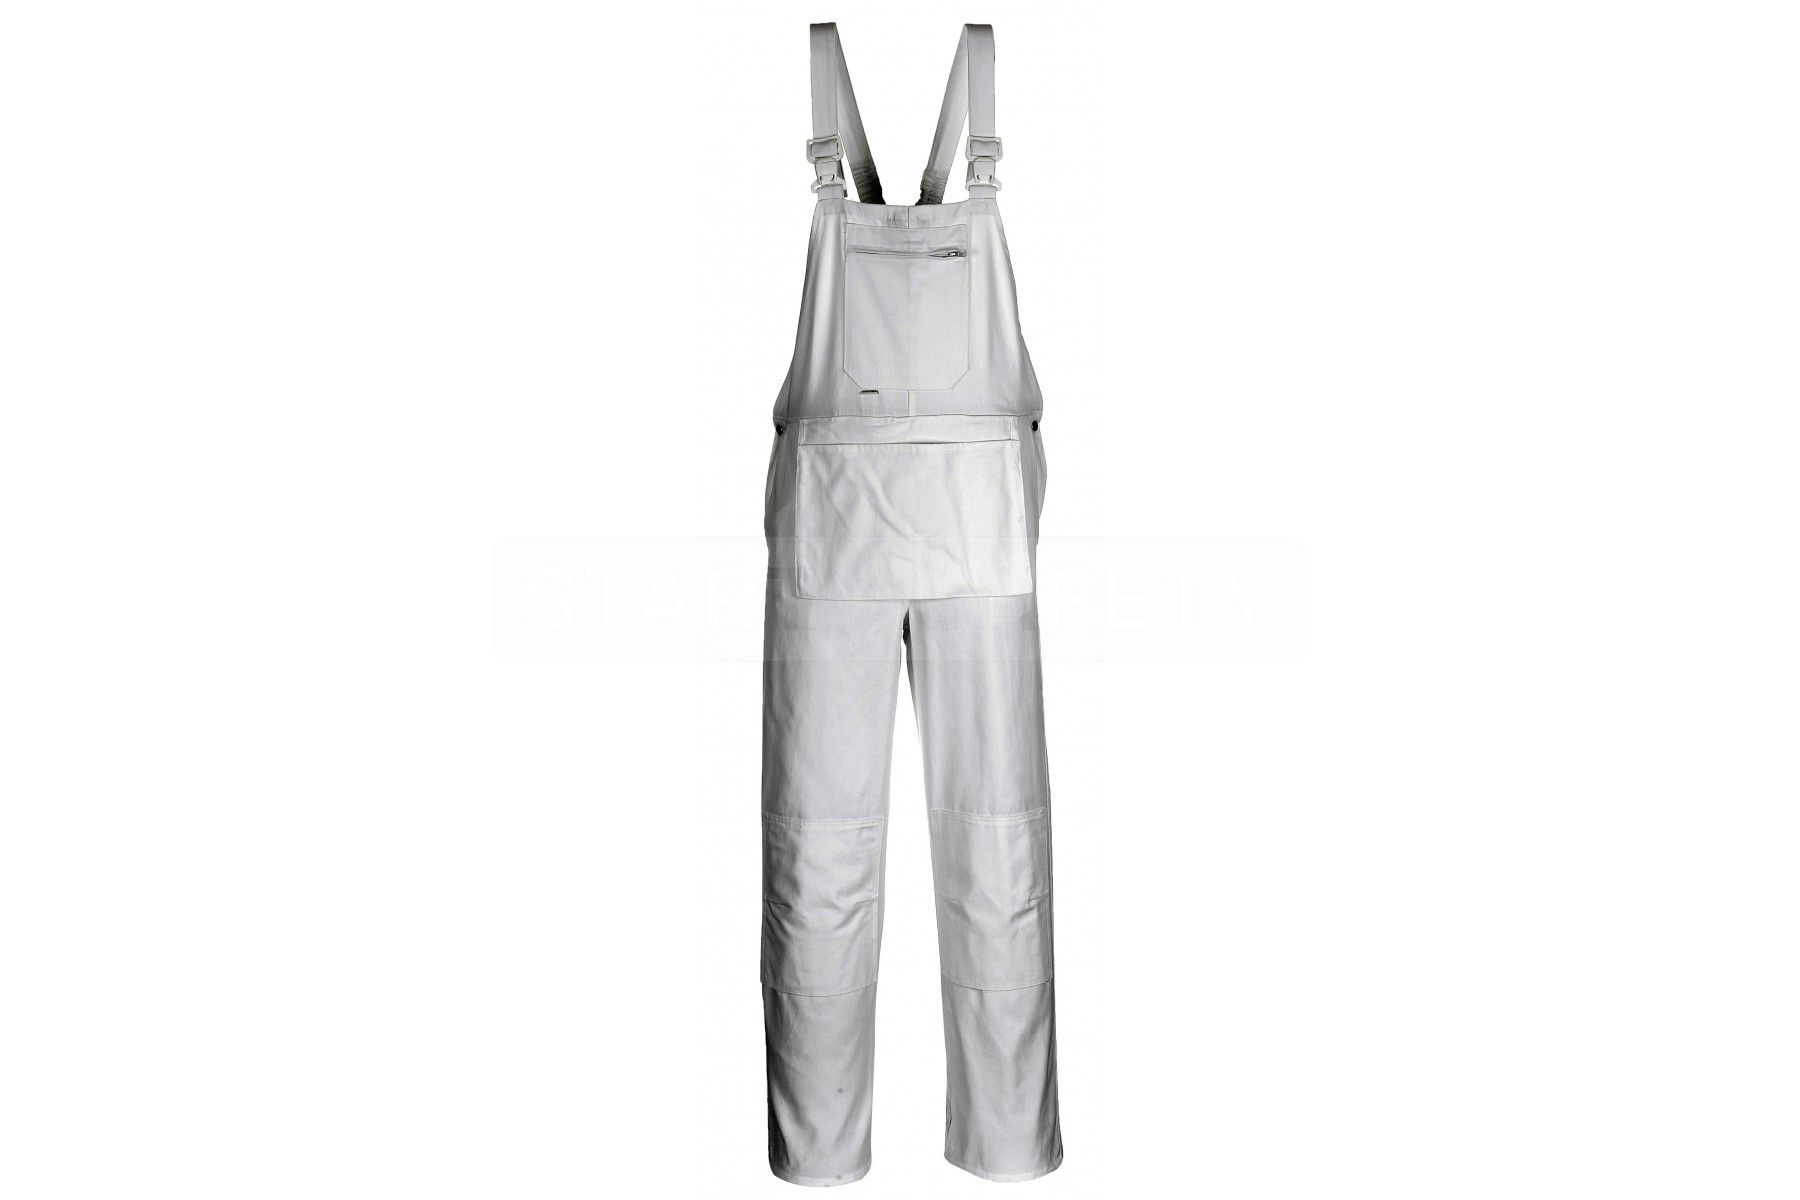 Portwest S810 Bolton White Cotton Painters Bib Overalls with Knee Pad Pockets 